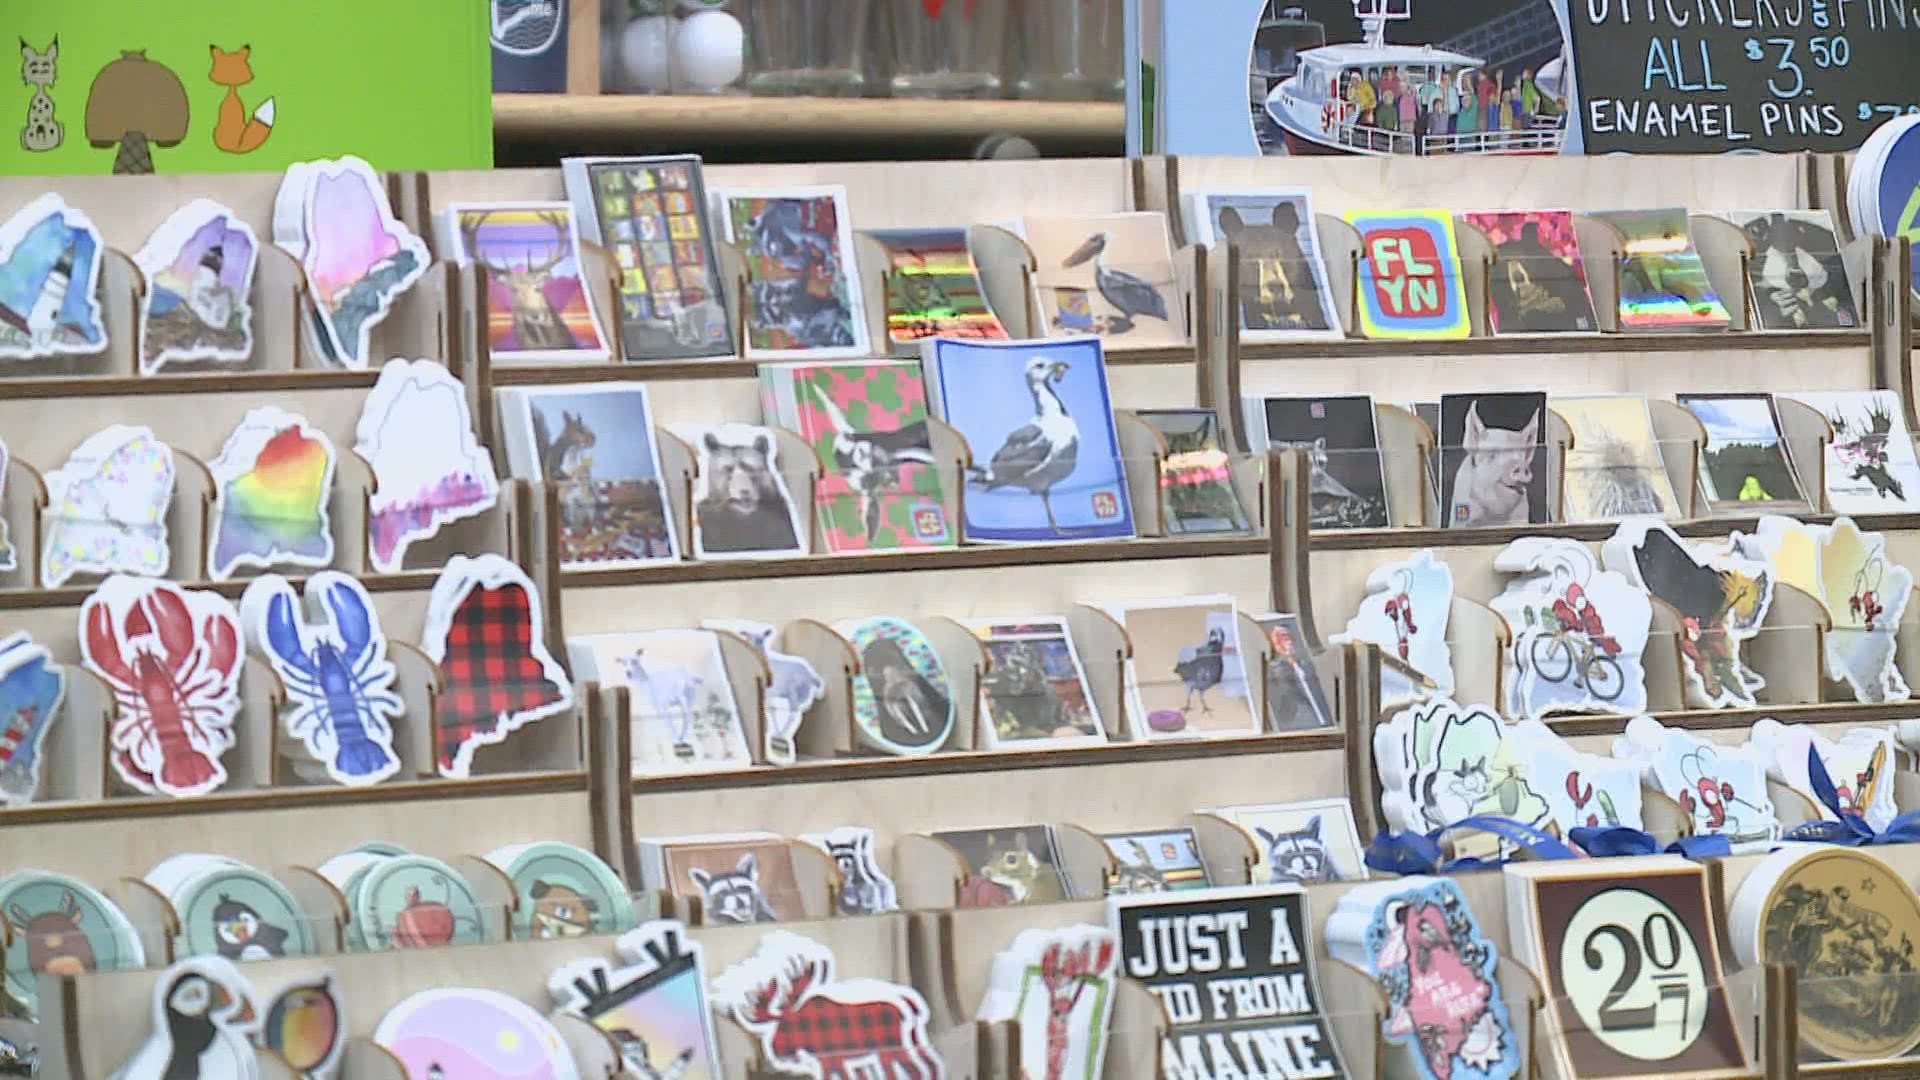 The little corner souvenir shop on Exchange Street in the Old Port is striving to be a local art gallery to help support art, Maine, and our state's community.